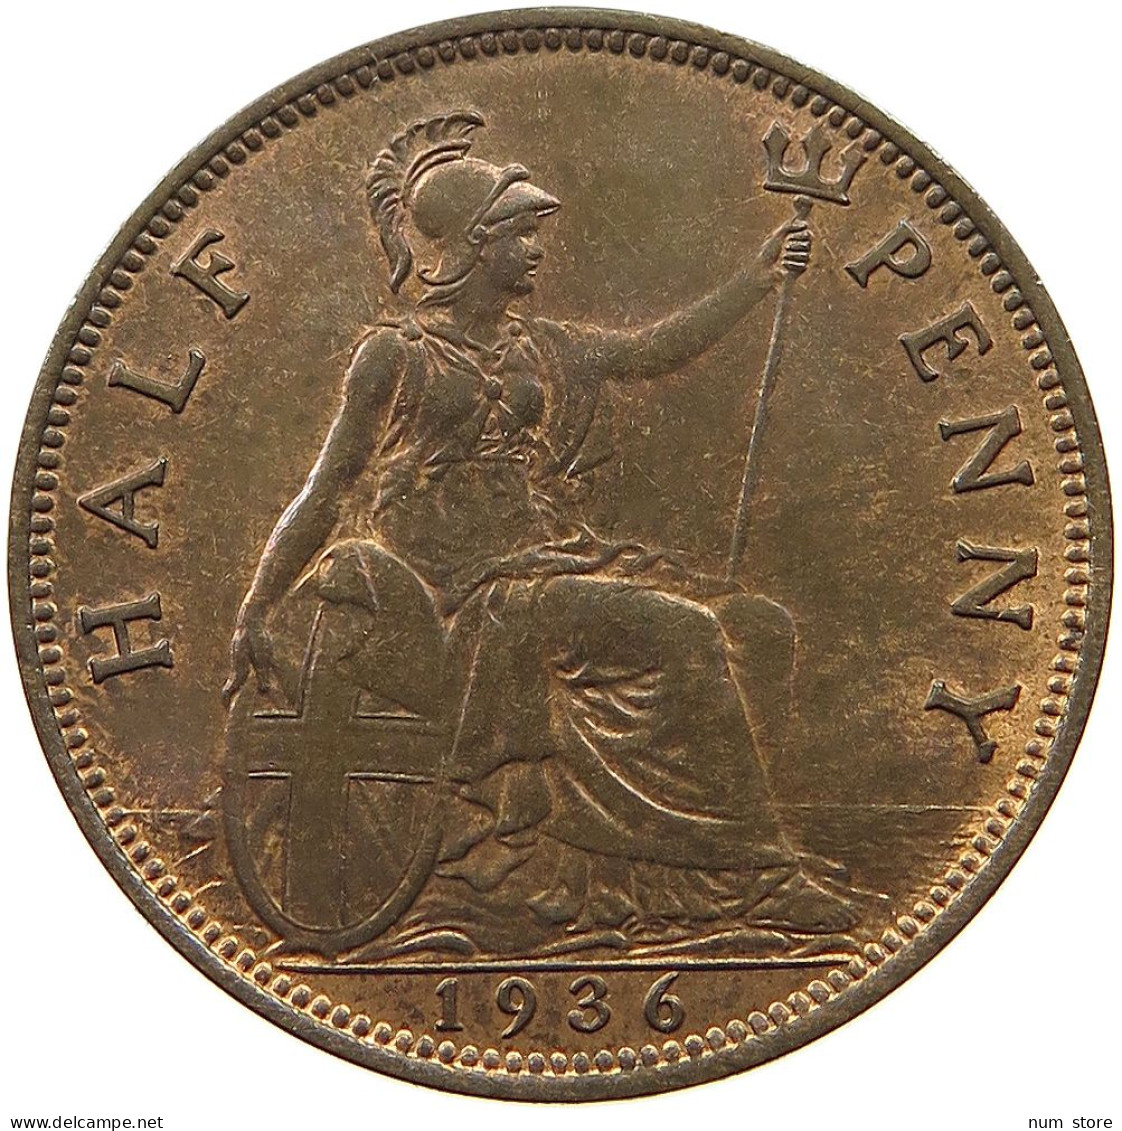 GREAT BRITAIN HALFPENNY 1936 George V. (1910-1936) #t058 0535 - C. 1/2 Penny